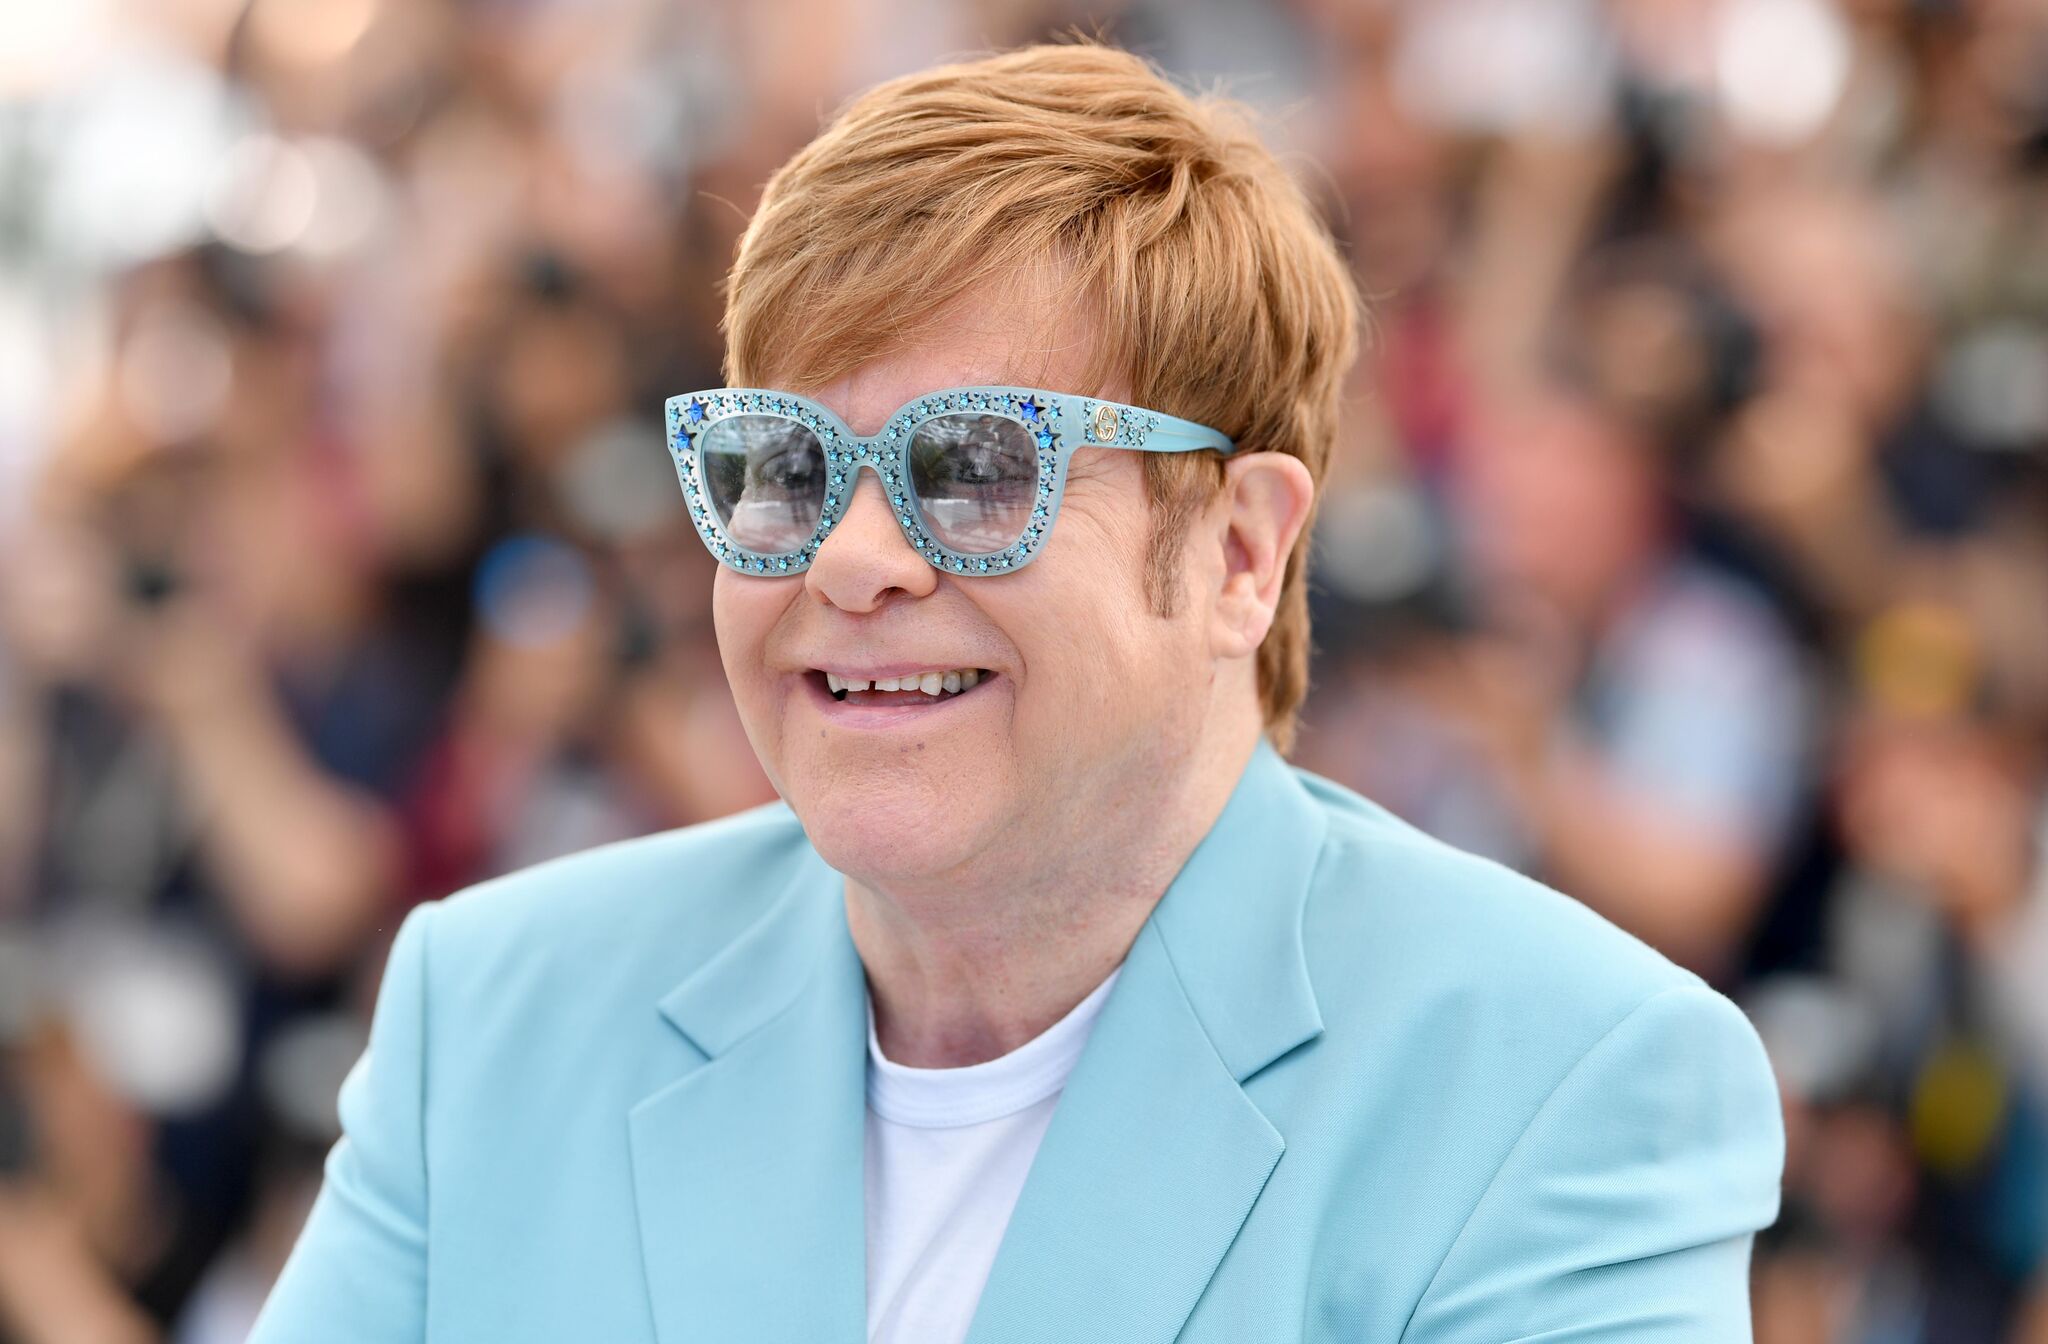 Sir Elton John attends the photocall for "Rocketman" during the 72nd annual Cannes Film Festival  | Getty Images